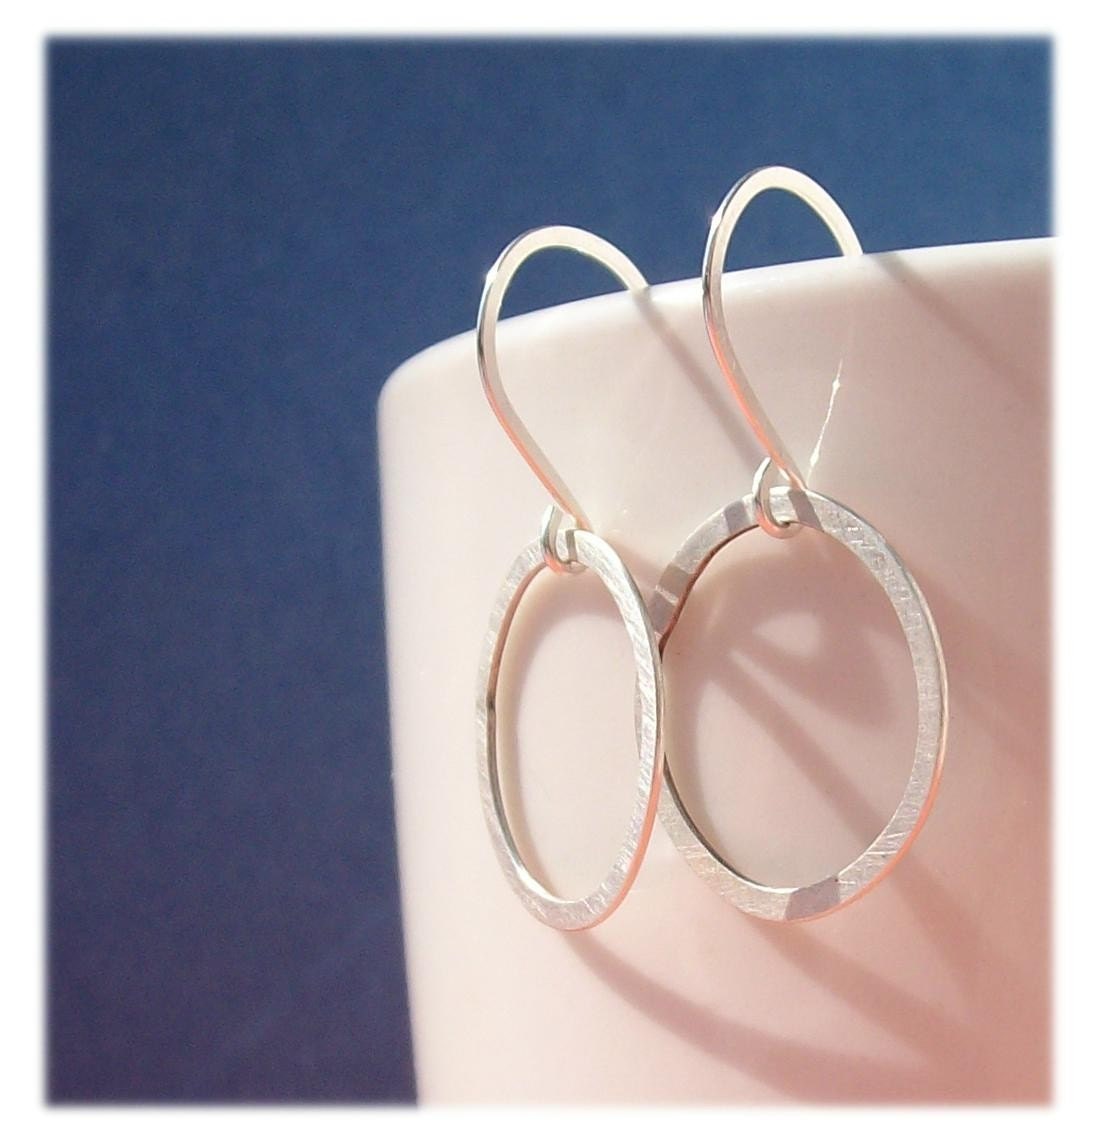 brushed, circle, earring, earrings, free shipping, hoop, jewelry, metal, metalwork, pawandclawdesigns, round, small, sterling silver, team wist